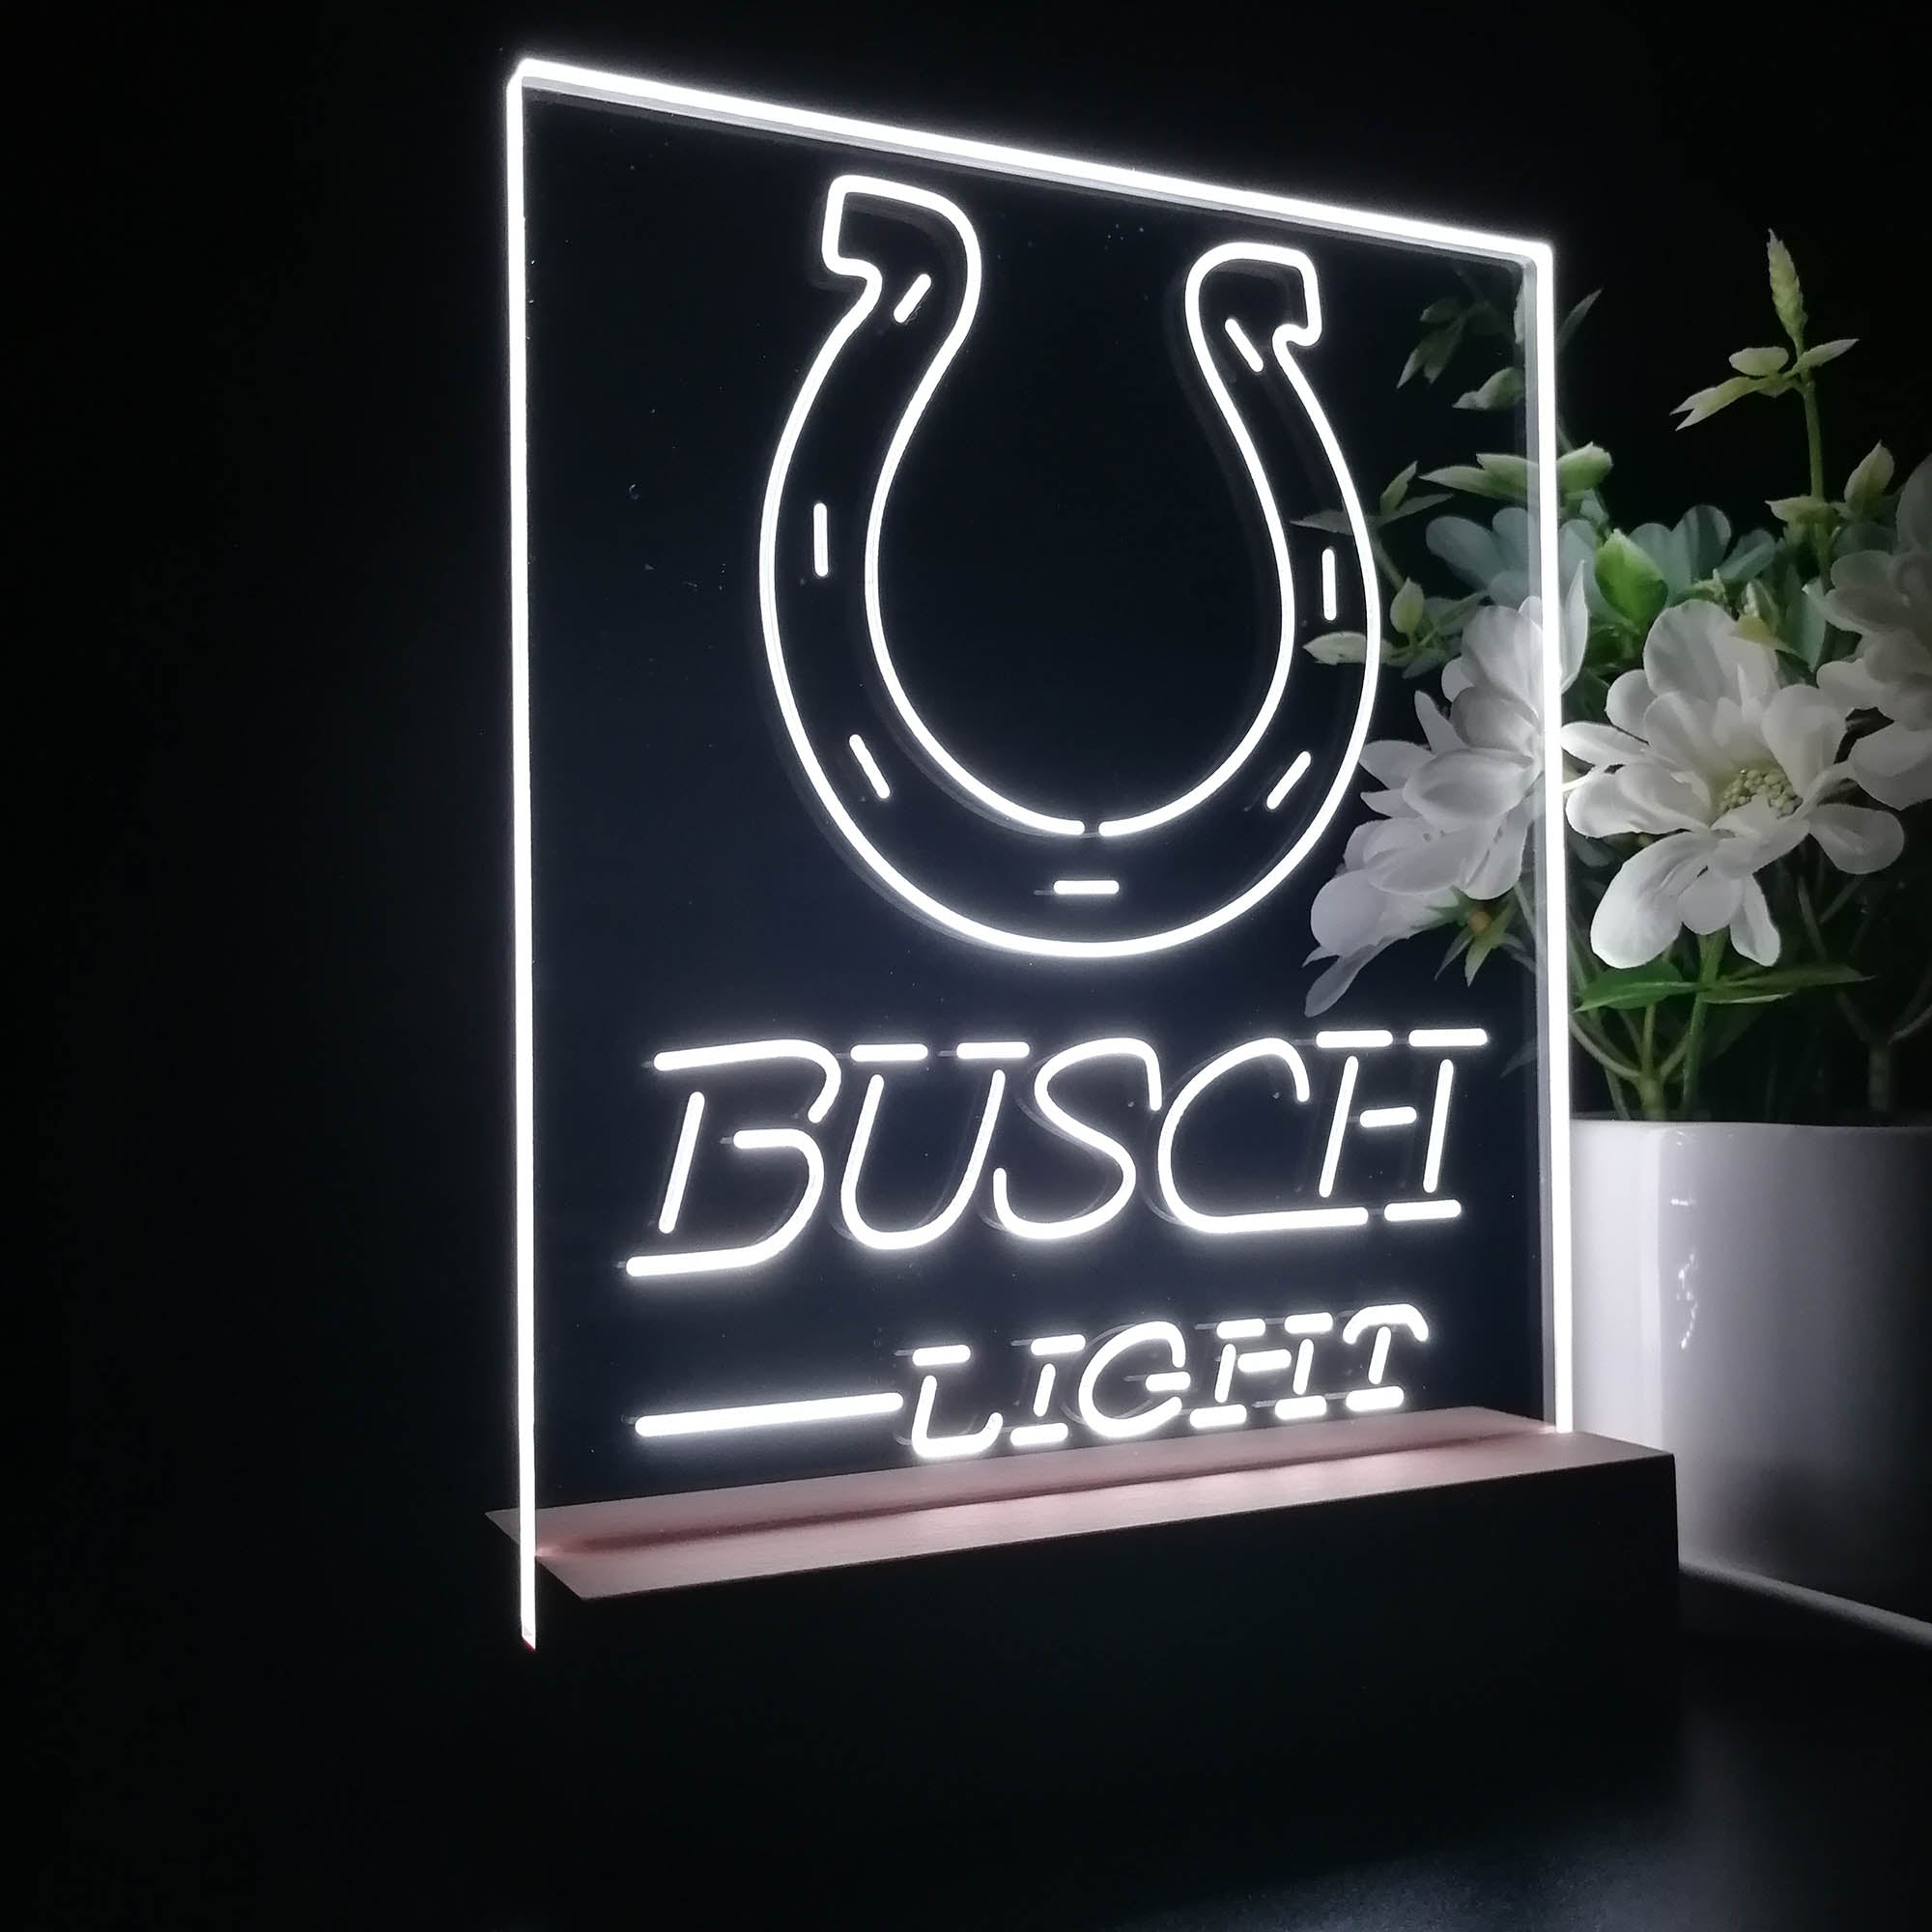 Indianapolis Colts Busch Light 3D LED Optical Illusion Sport Team Night Light